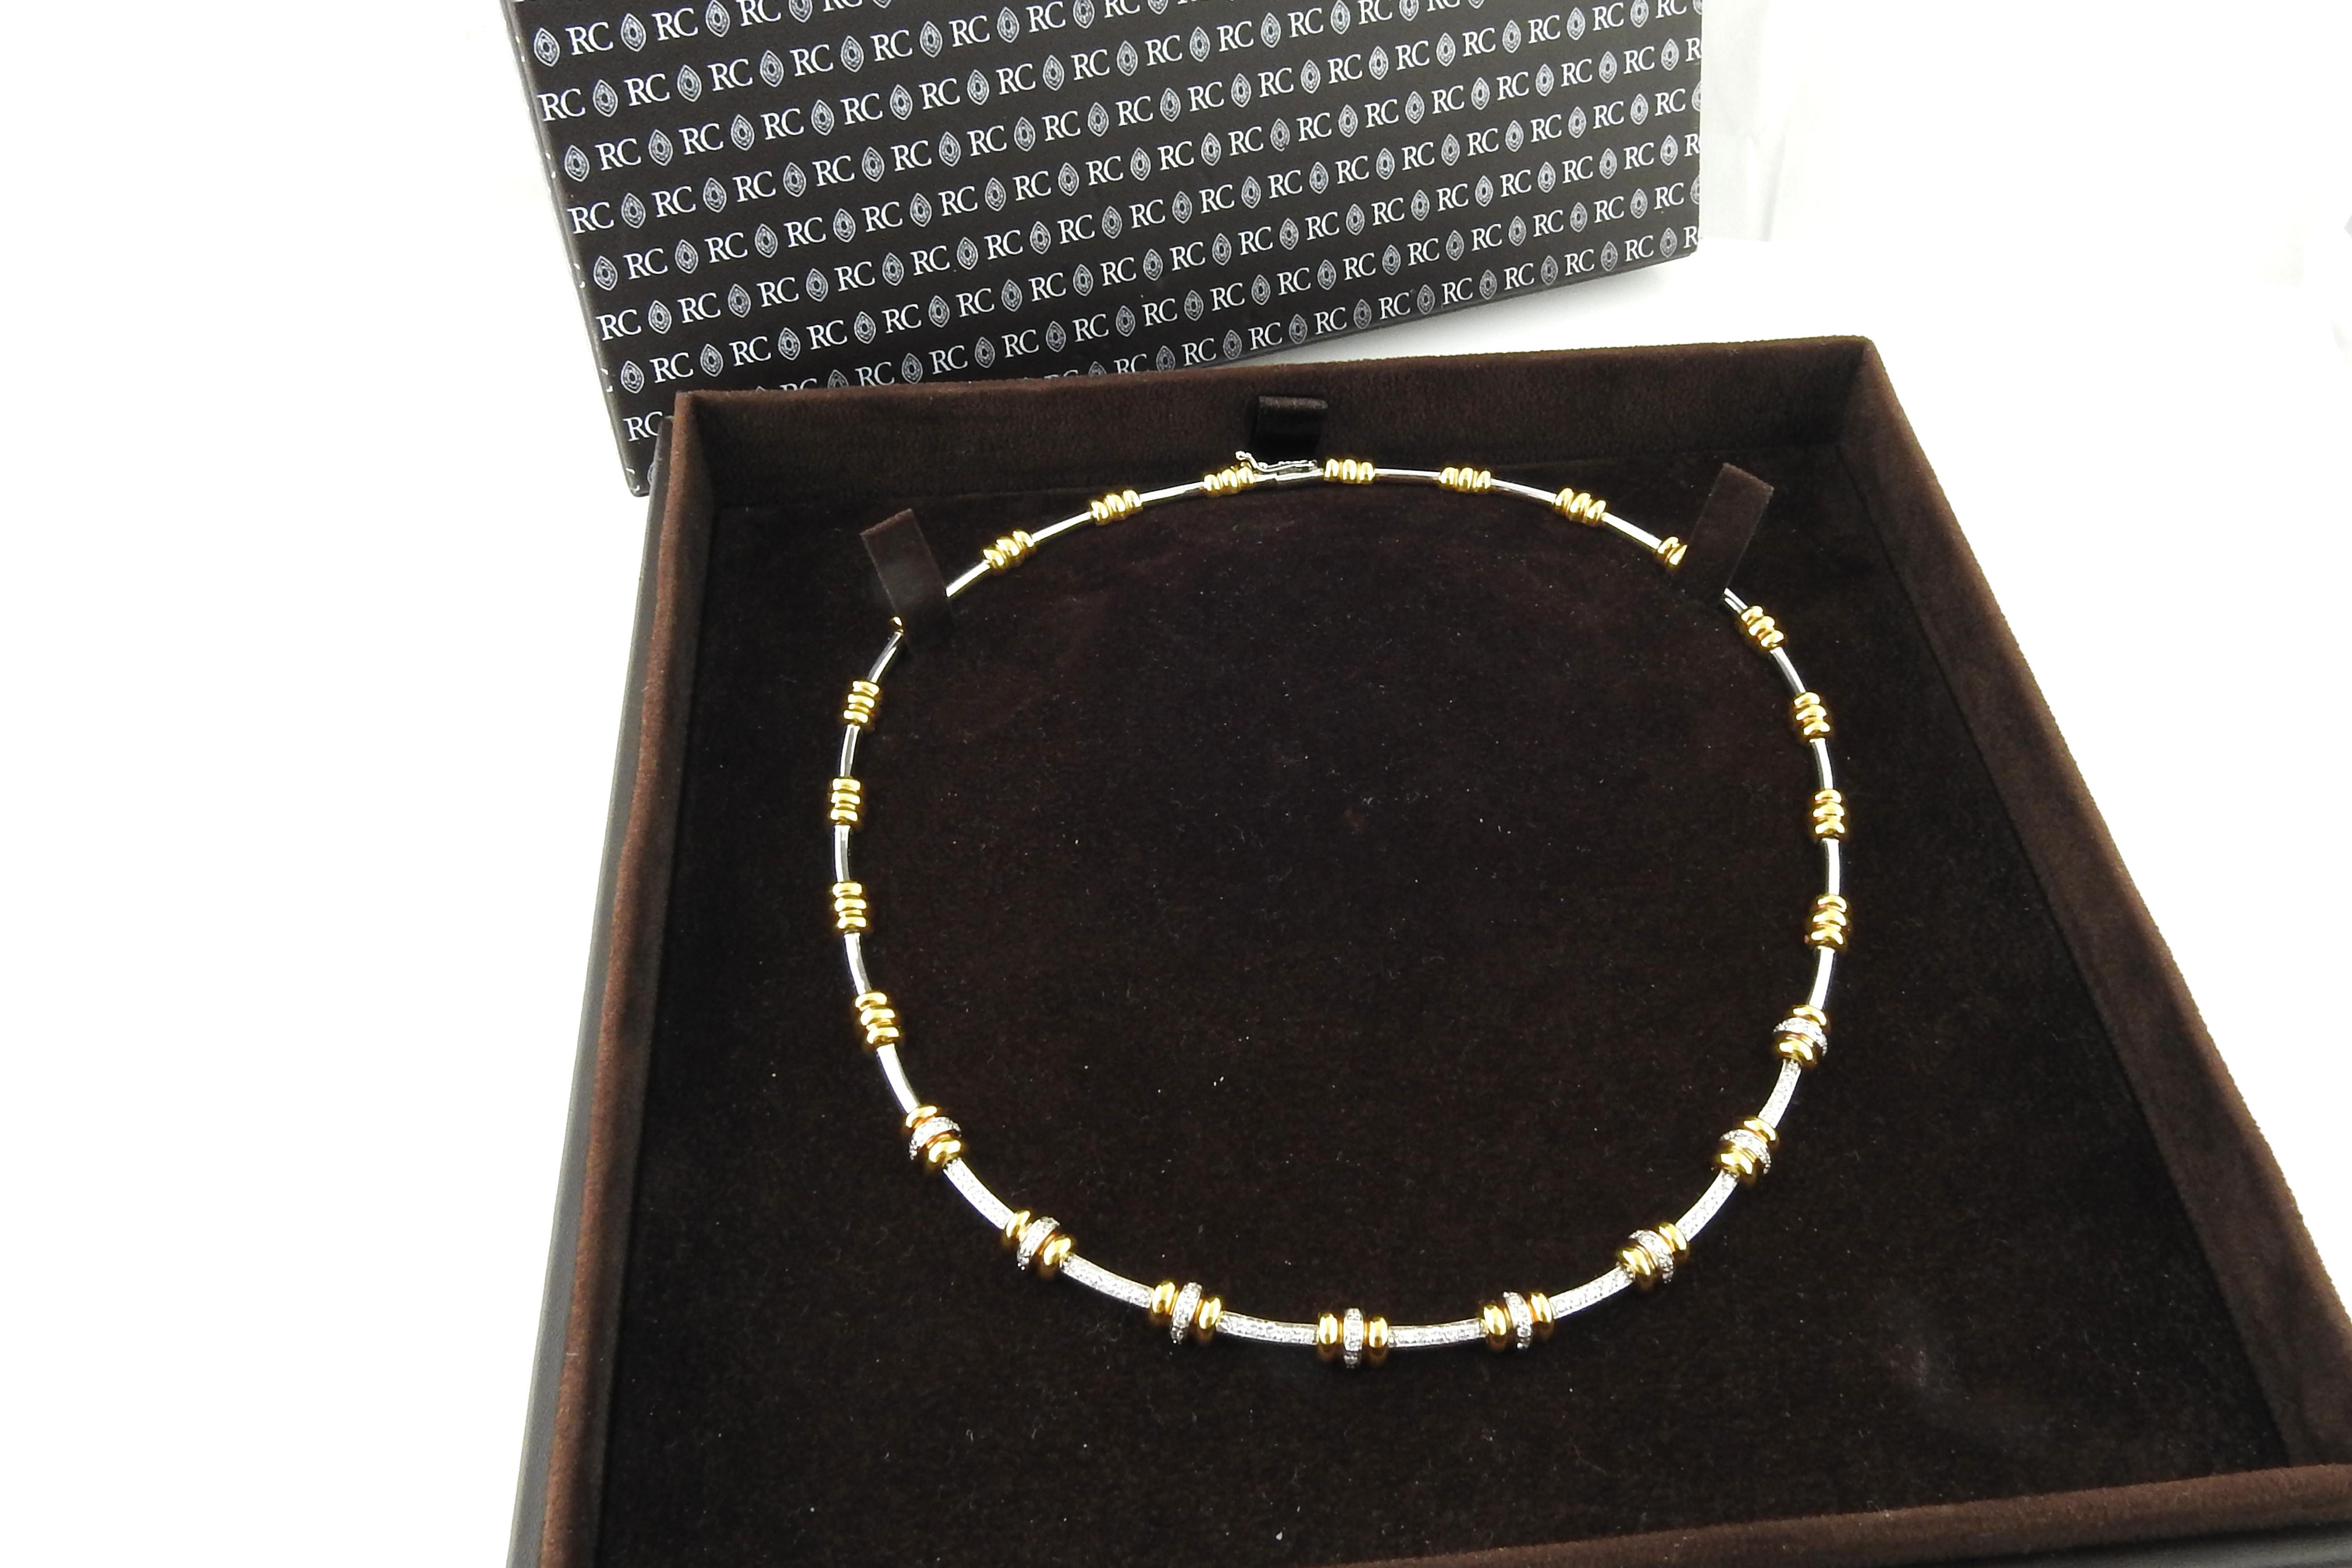 Roberto Coin 18K White and Yellow Gold Diamond Choker Collar Necklace #16961 For Sale 1